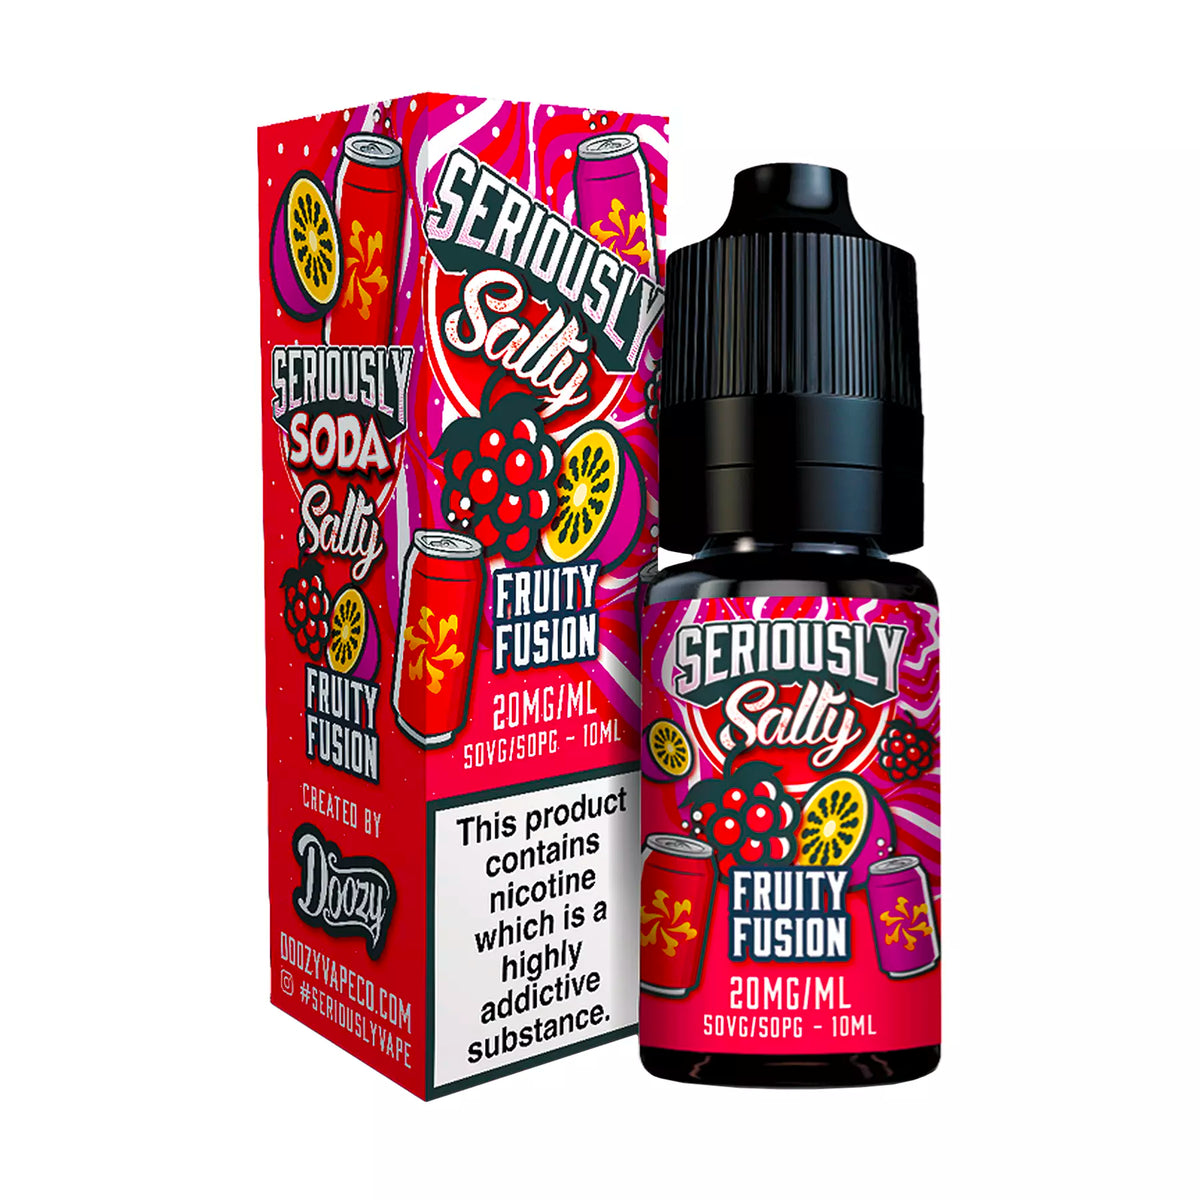 A Juicy Medley of Mandarin and Passionfruit. With a hint of Lychee Apple. Based on a Popular Red Fruit Twist beverage. An Amazingly tasty and succulent Flavour!